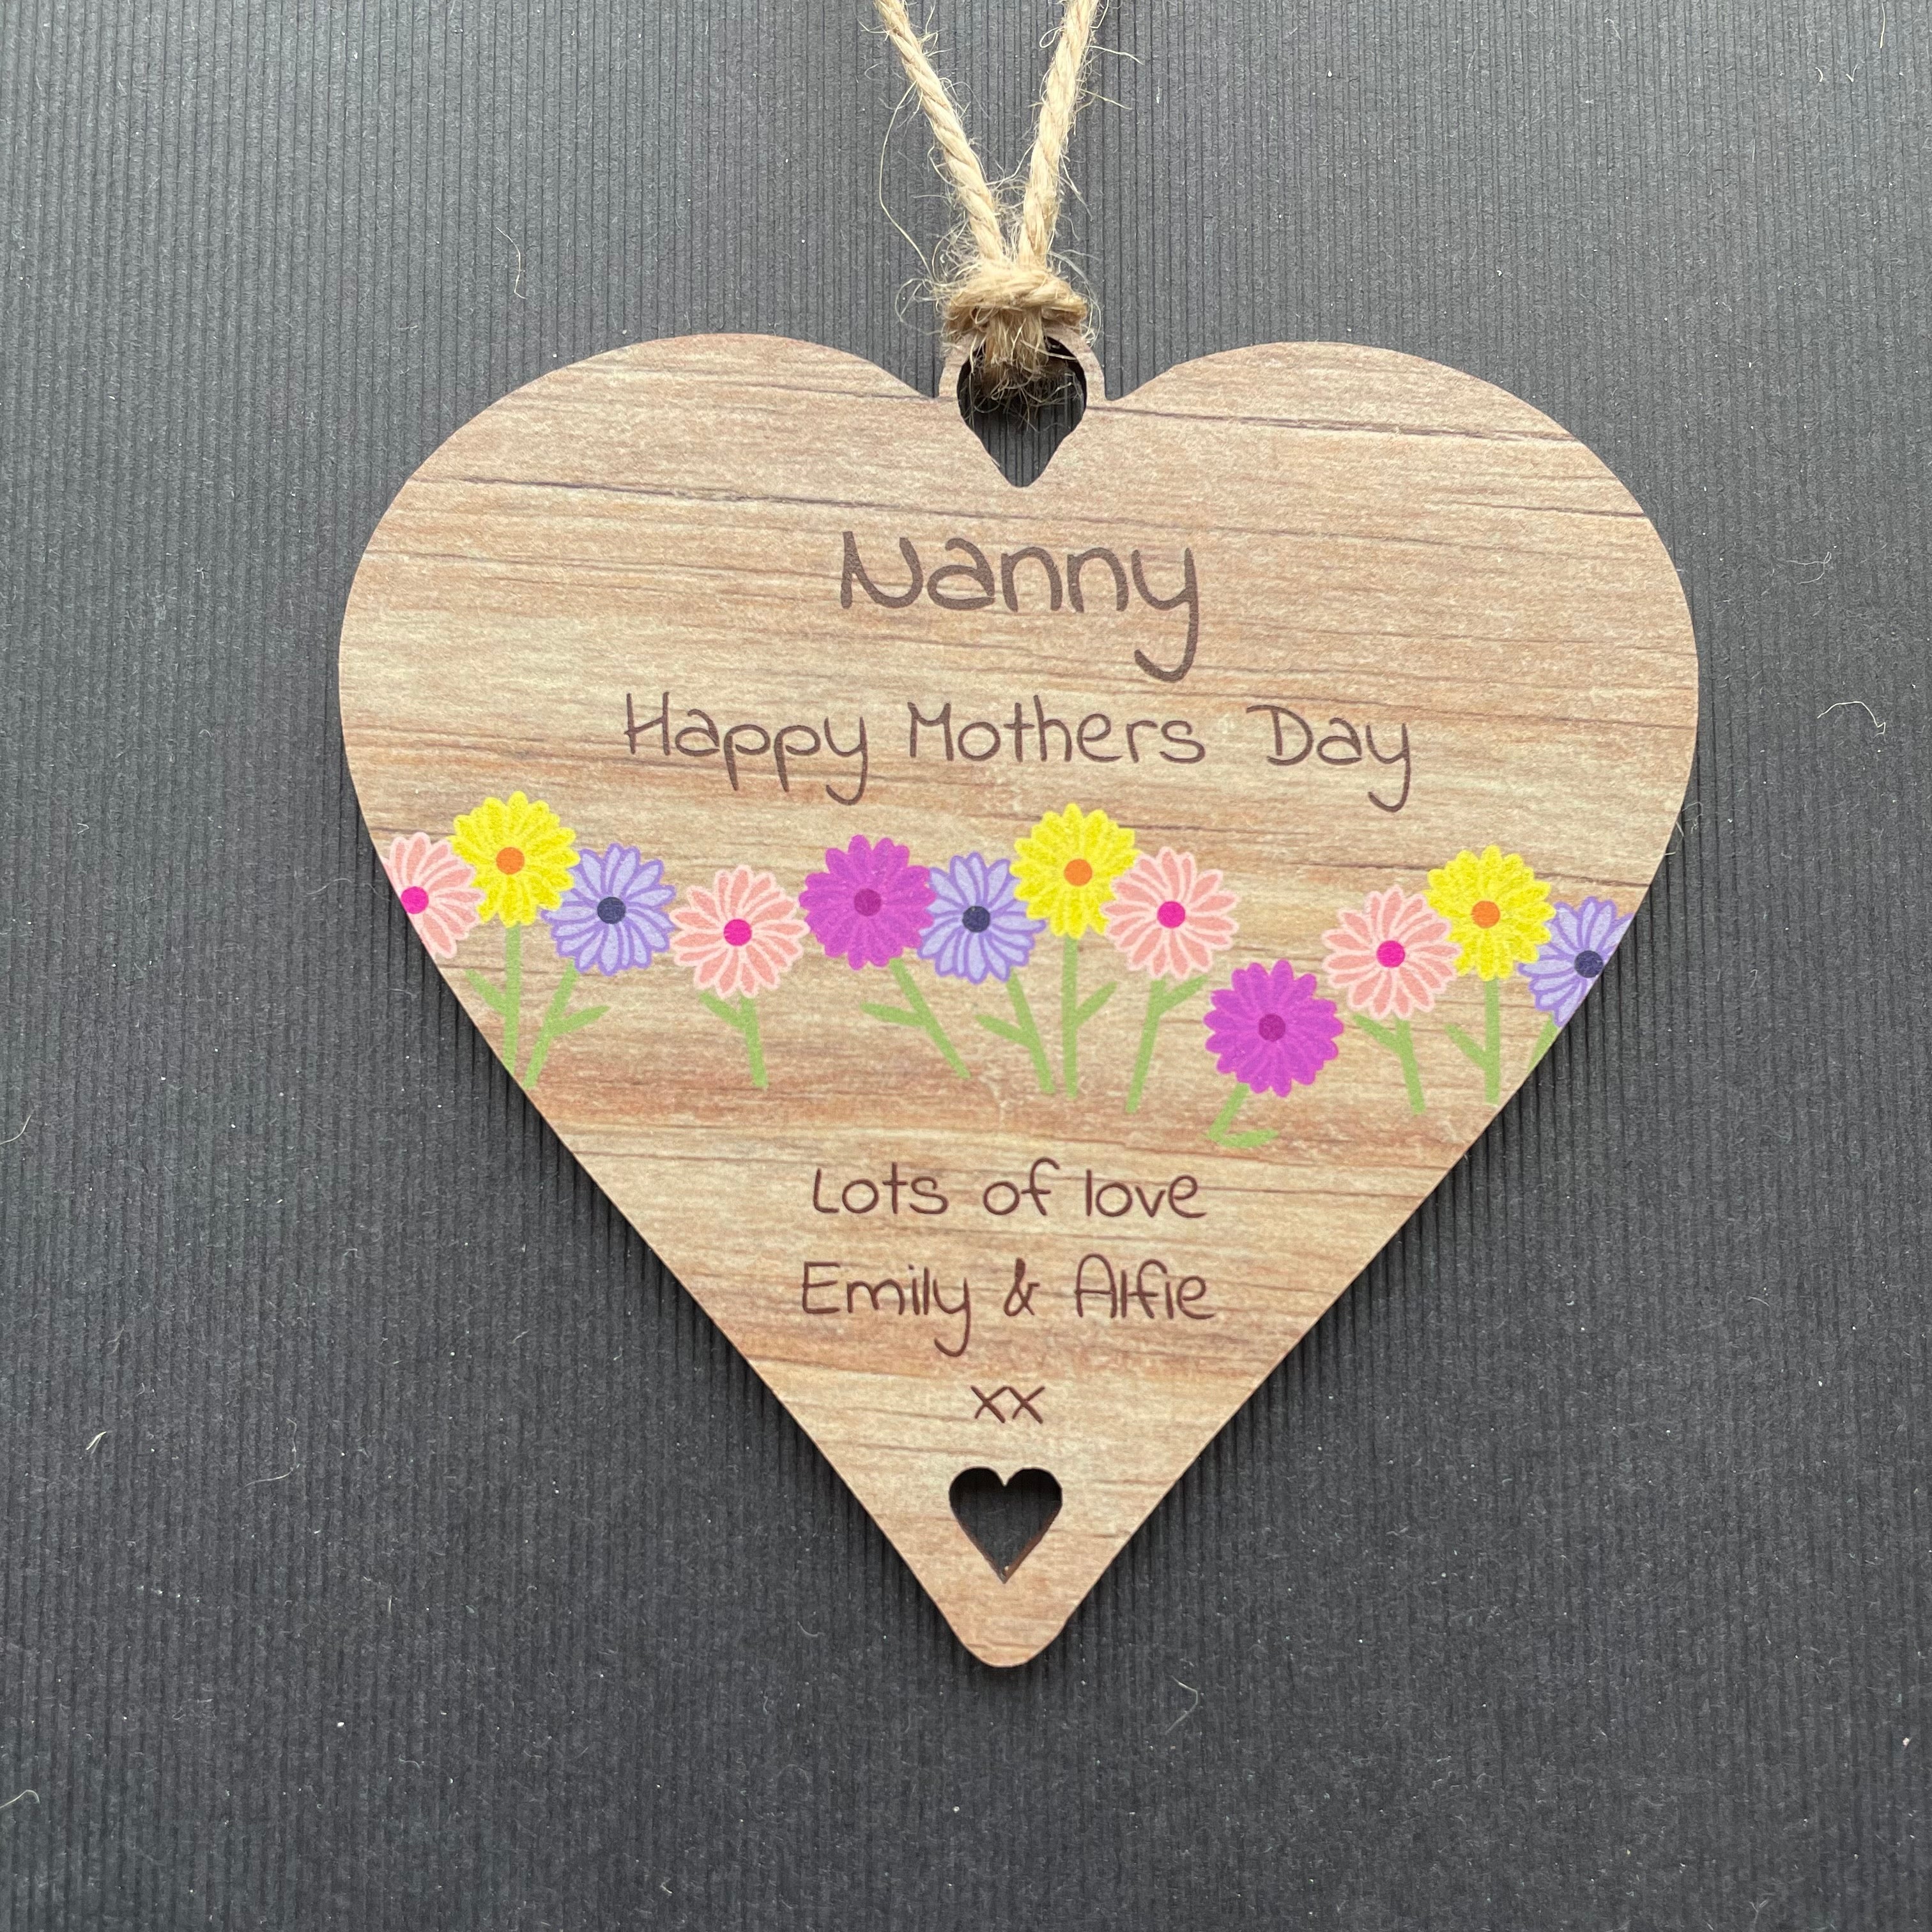 Personalised Gifts for Her Floral Heart: Mum, Grandma, Friend, Wife - 10cm Heart